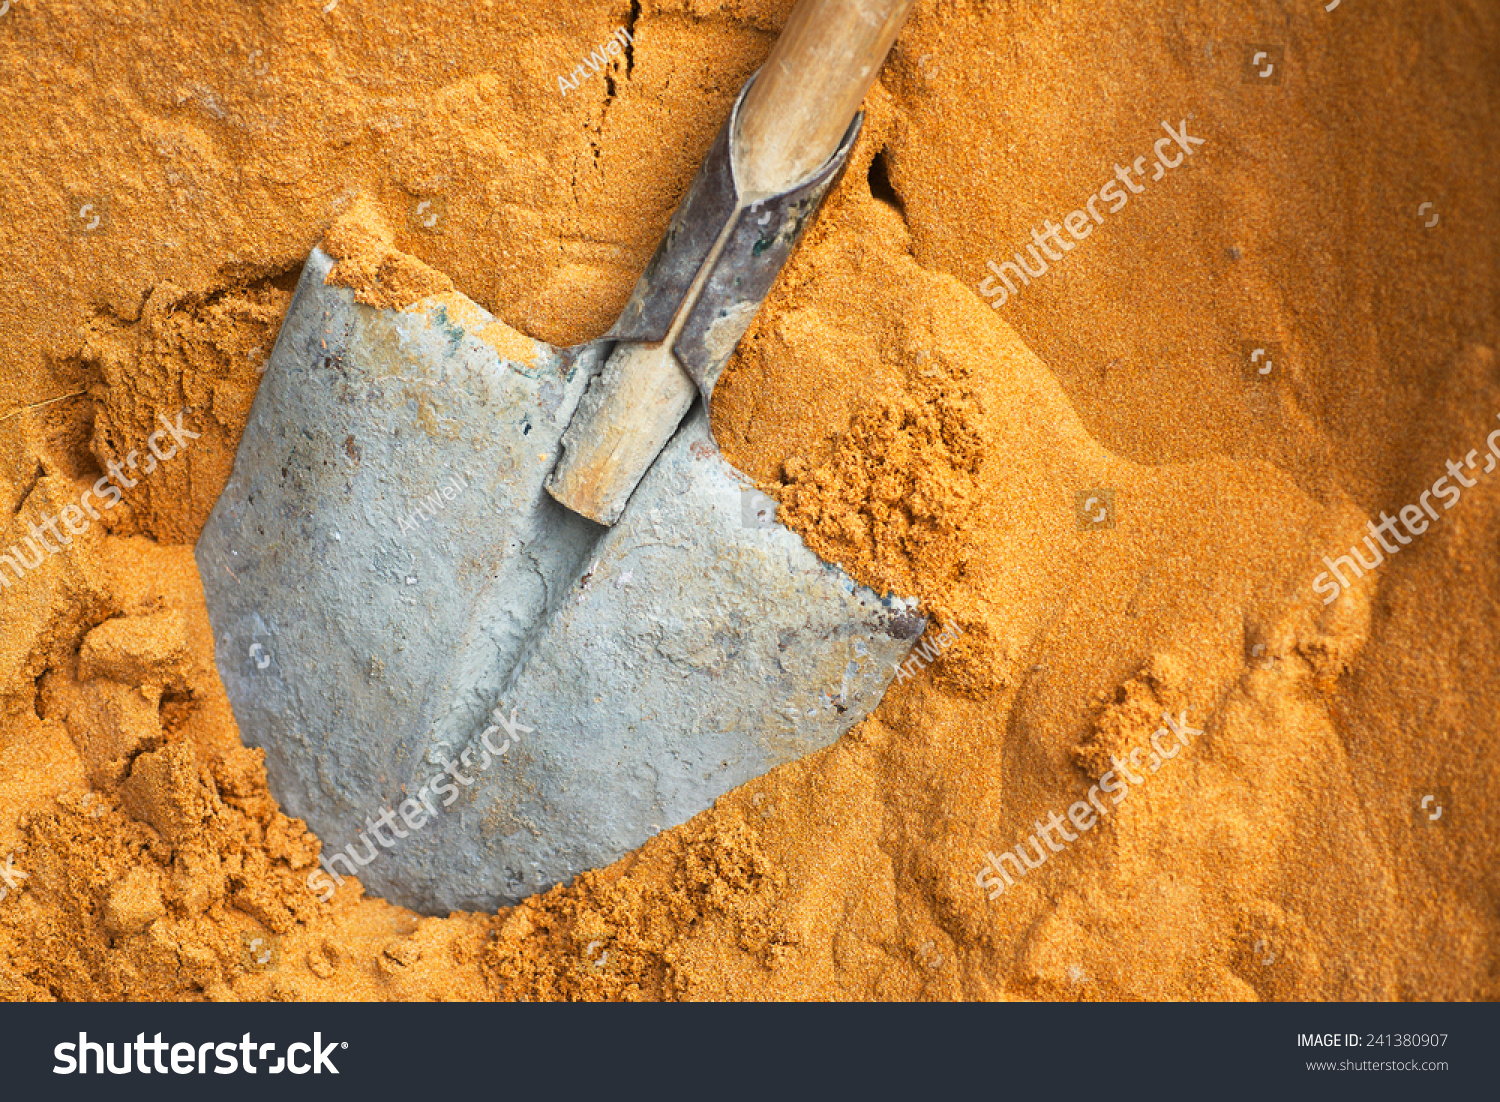 Building a shovel in sand on construction #241380907